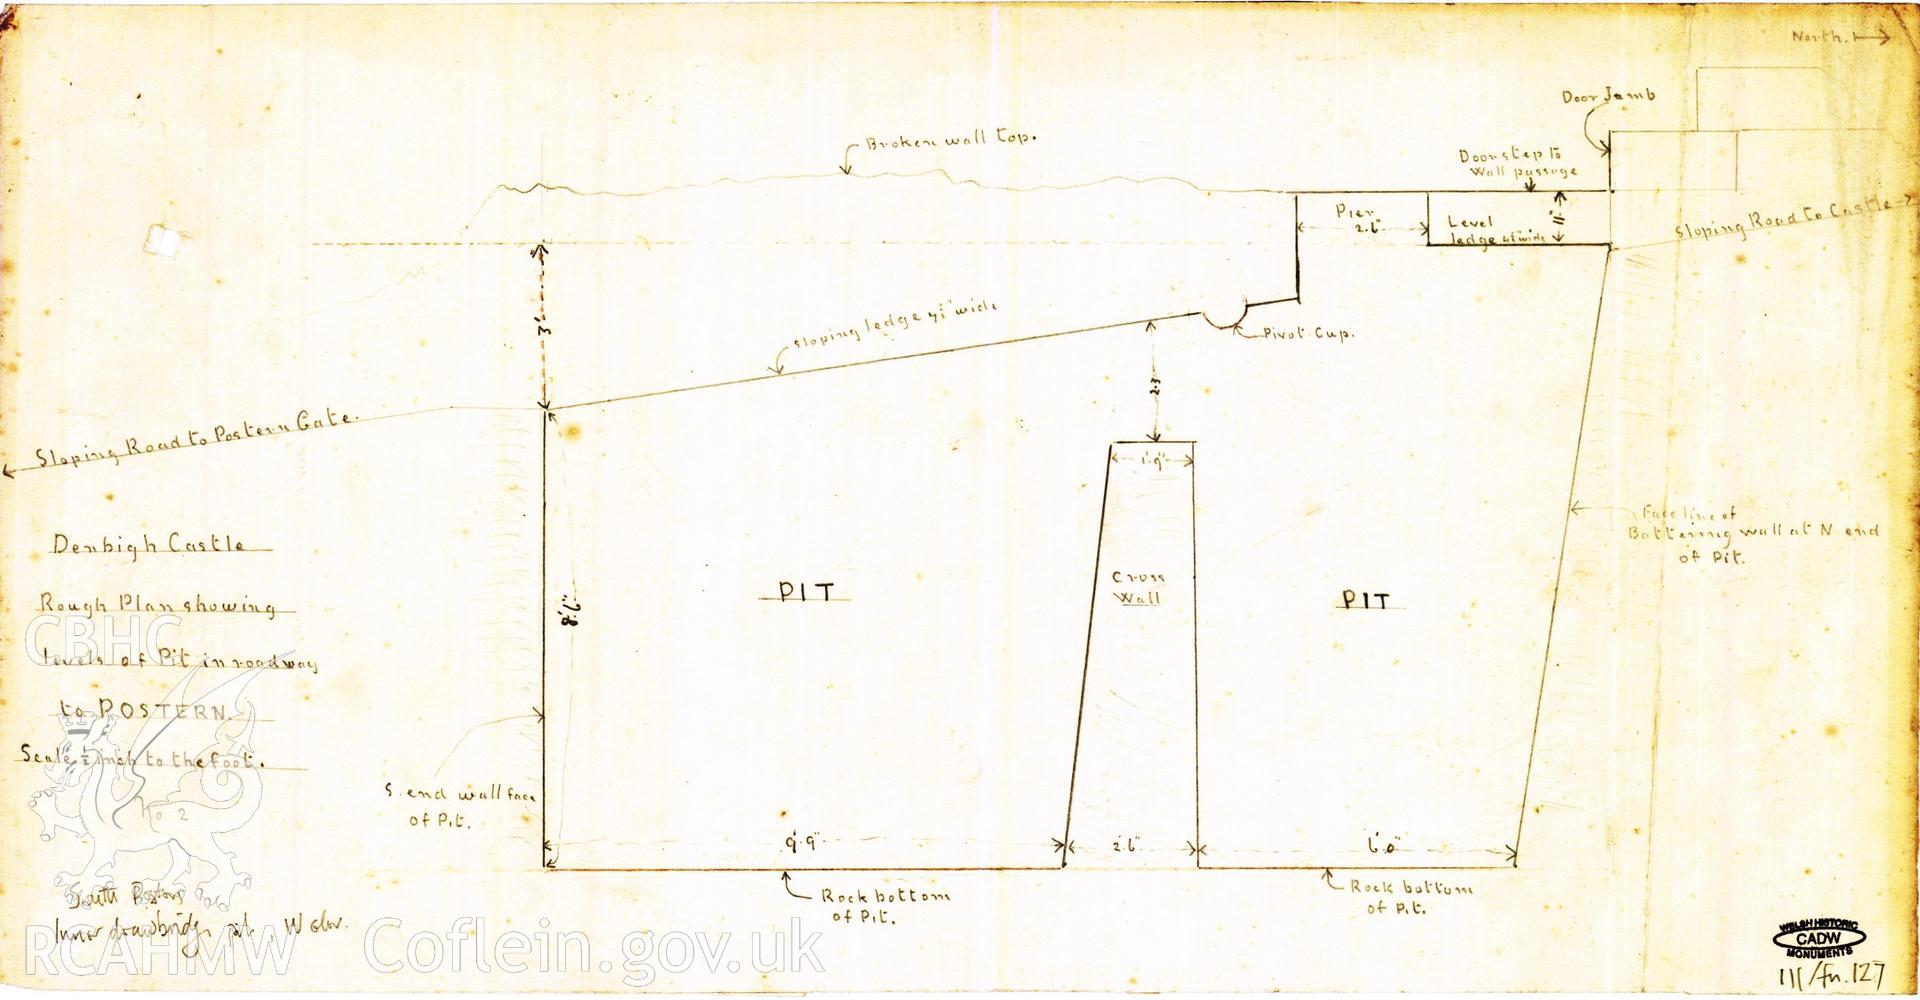 Cadw guardianship monument drawing of Denbigh Castle. Section showing levels of pit in roadway to Postern. Cadw Ref. No. 111/fn.127. Scale 1:24.